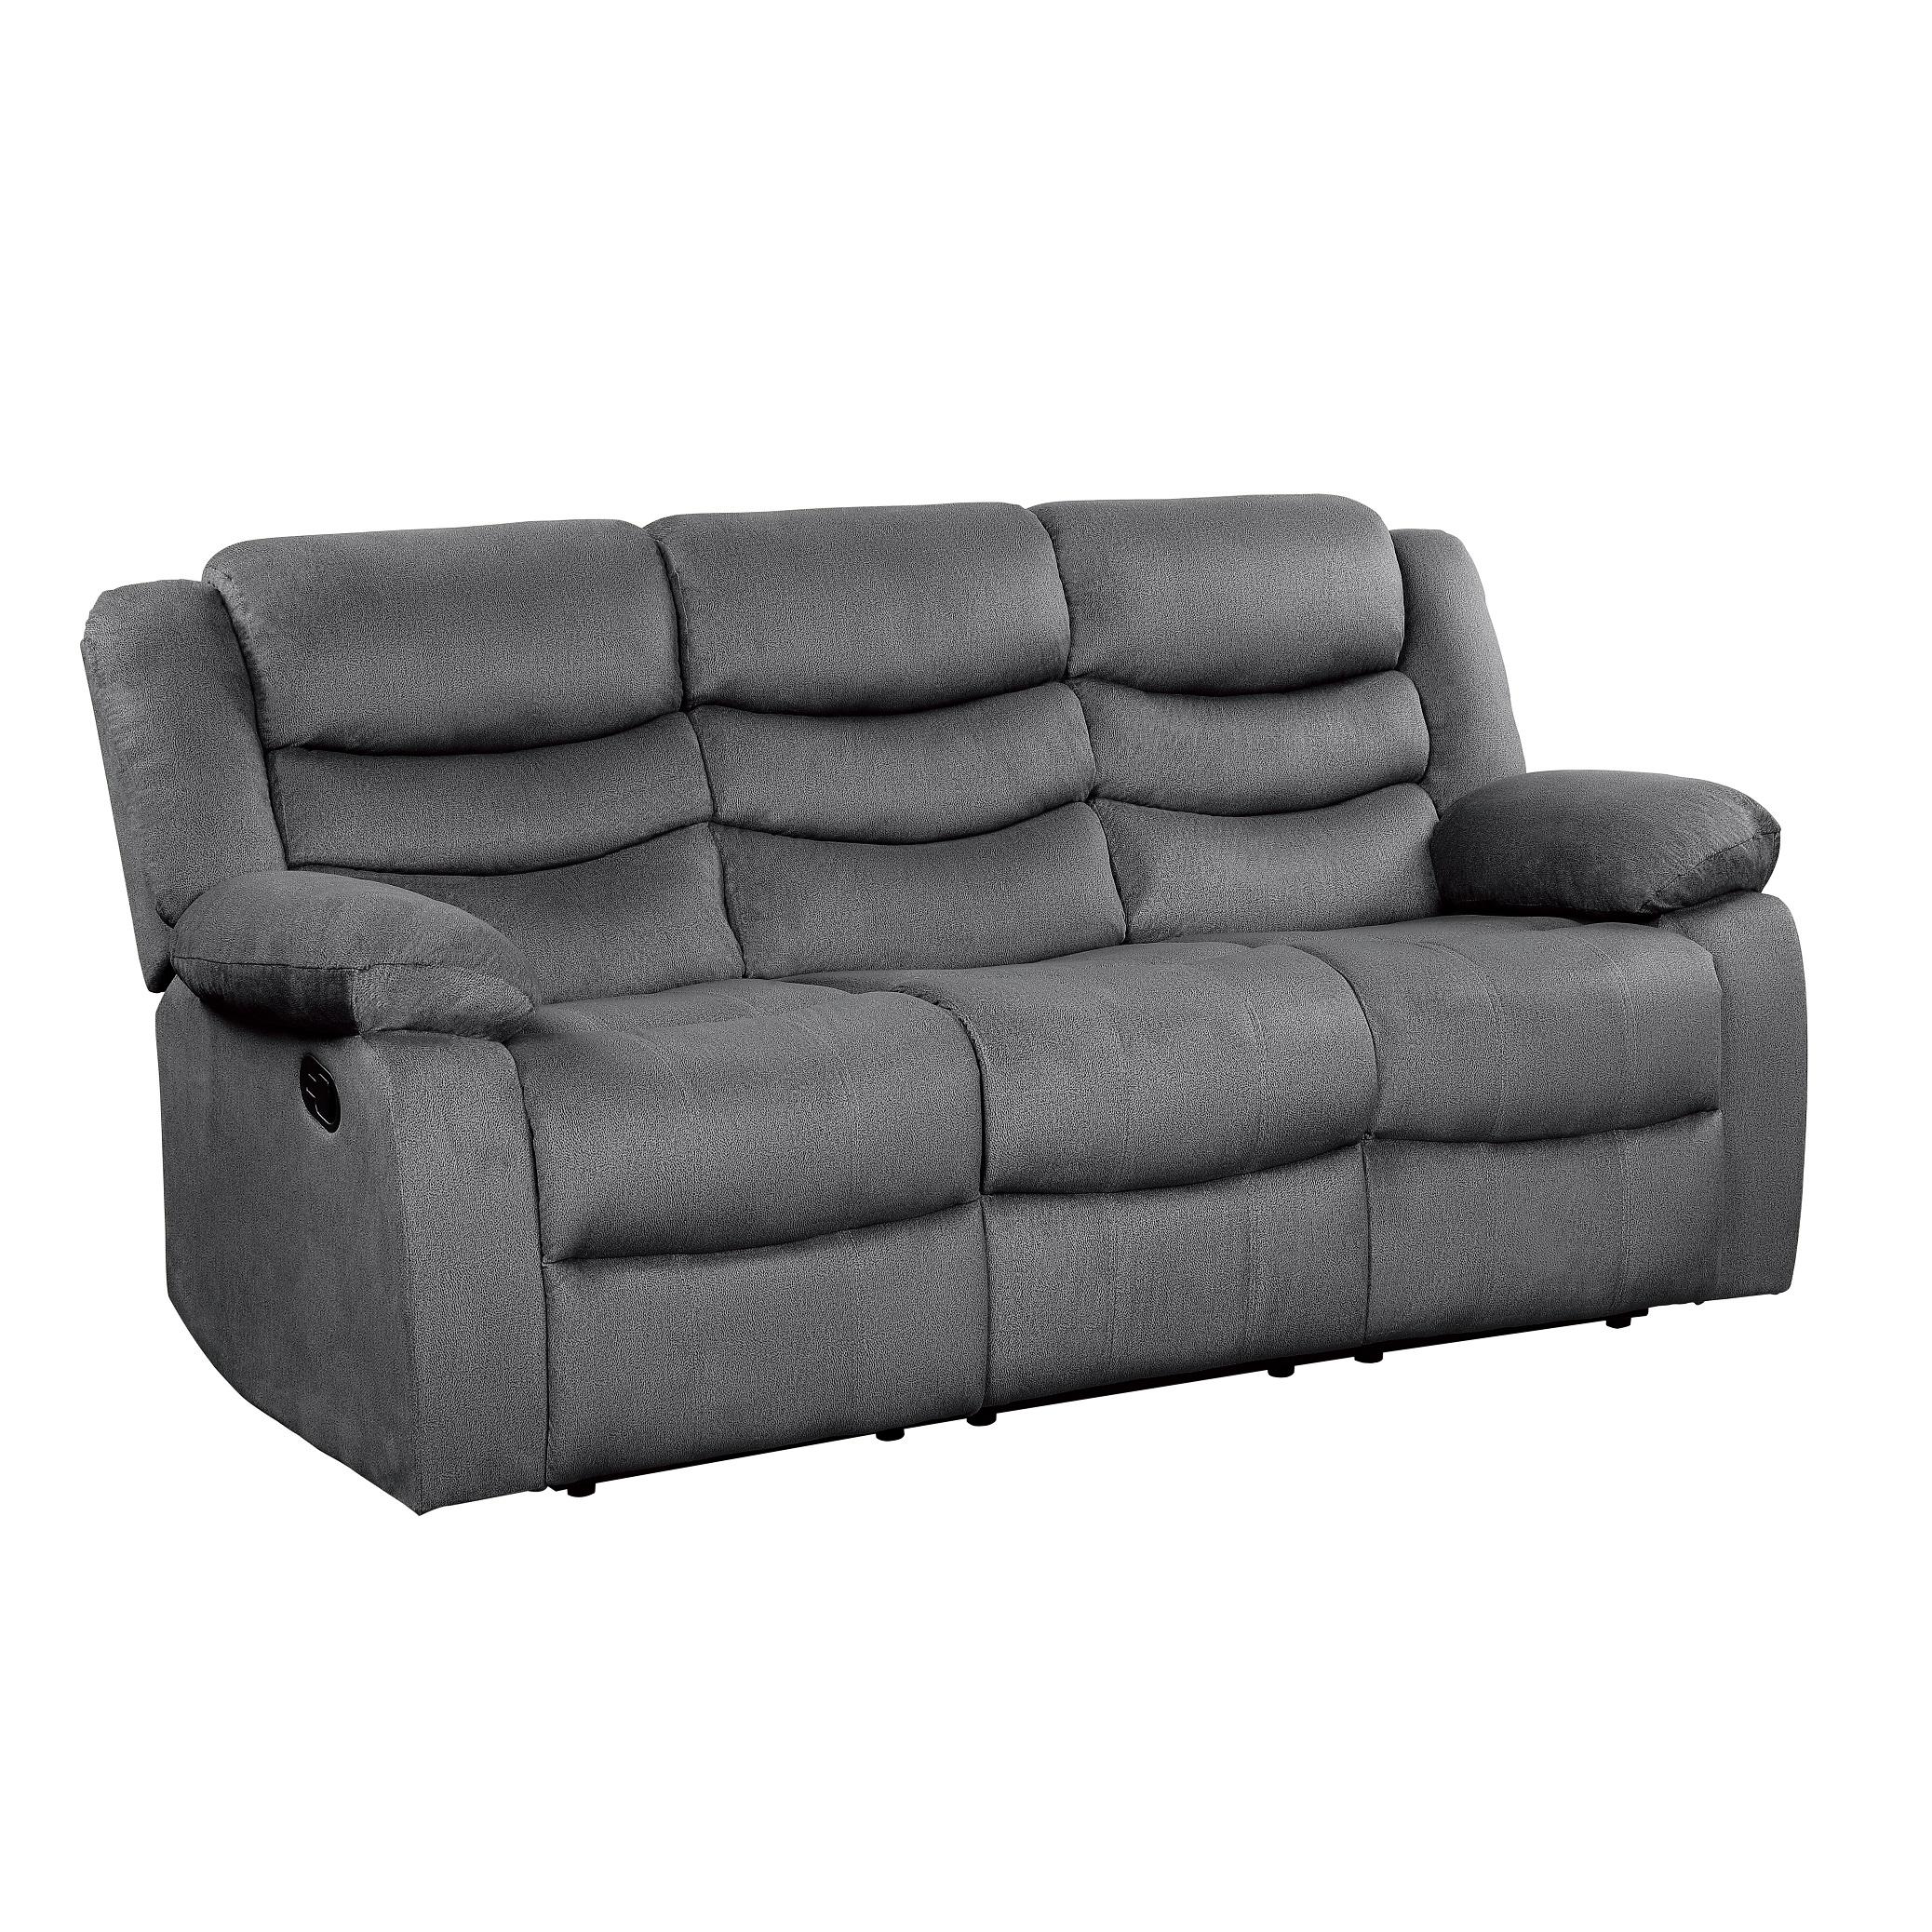 

    
Homelegance 9526GY-2PC Discus Reclining Sofa Set Gray 9526GY-2PC
